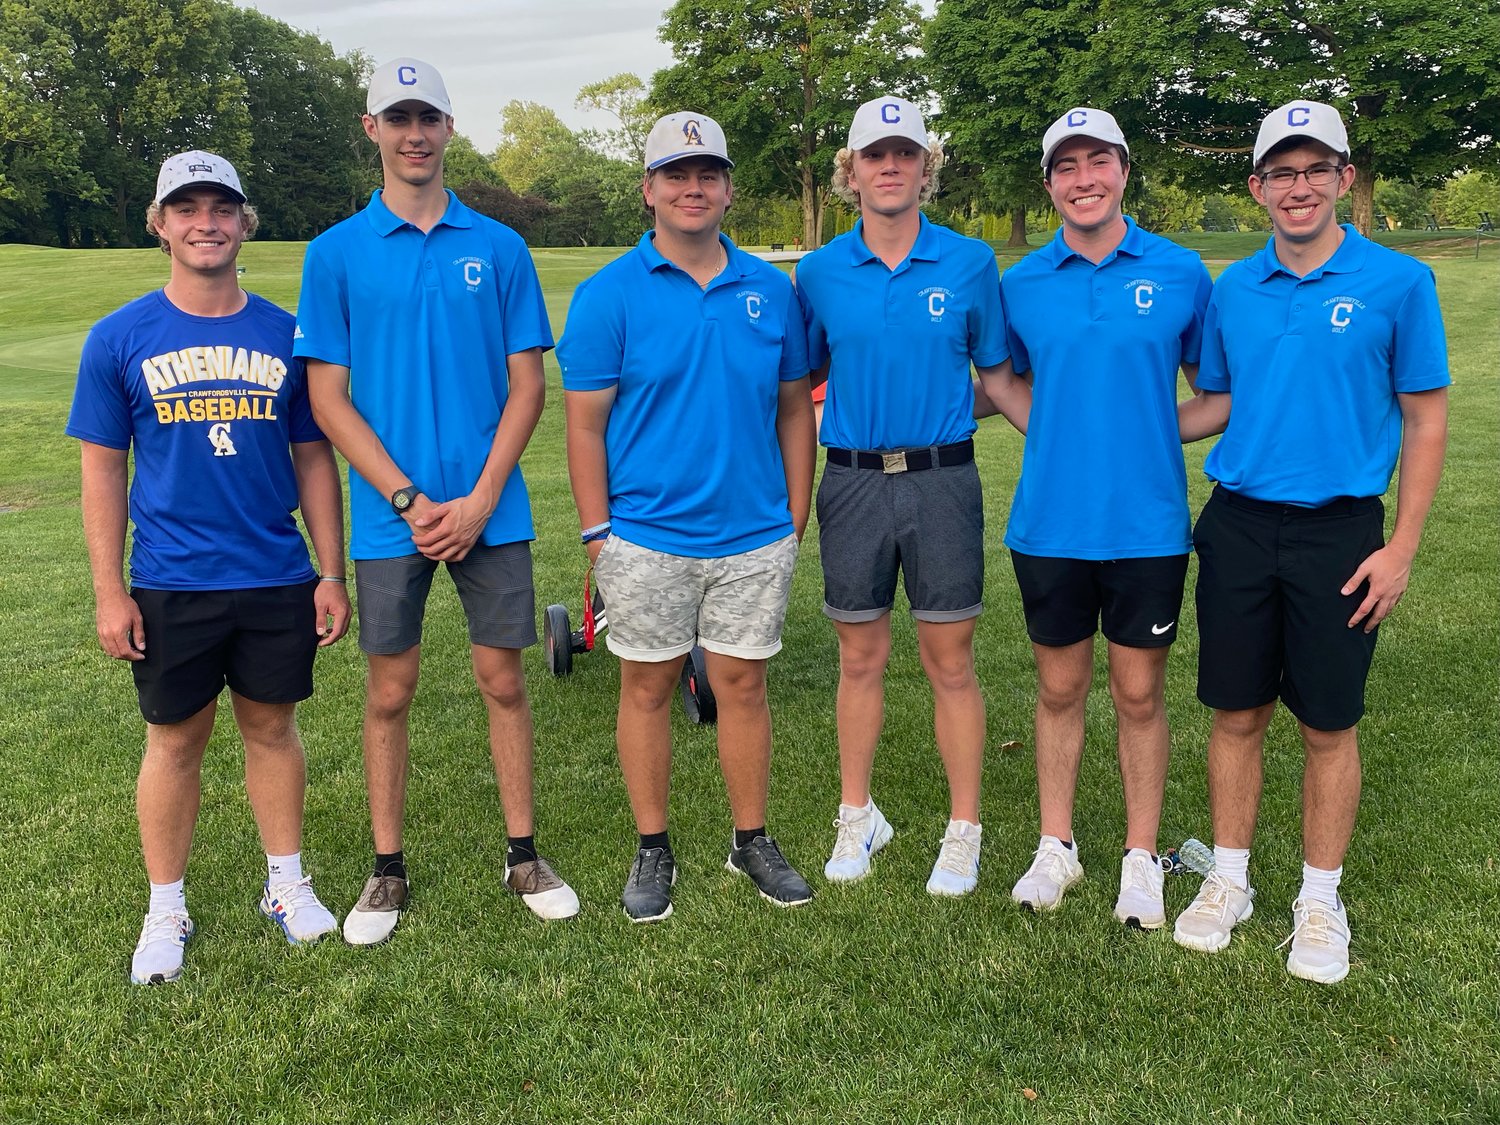 Crawfordsville boys golf edged out county rival Southmont yet again. This time it was for the county title as CHS bested the Mounties 347-349. The county title also give Crawfordsville the Journal Review’s Montgomery County Chase title for the first time in school history.